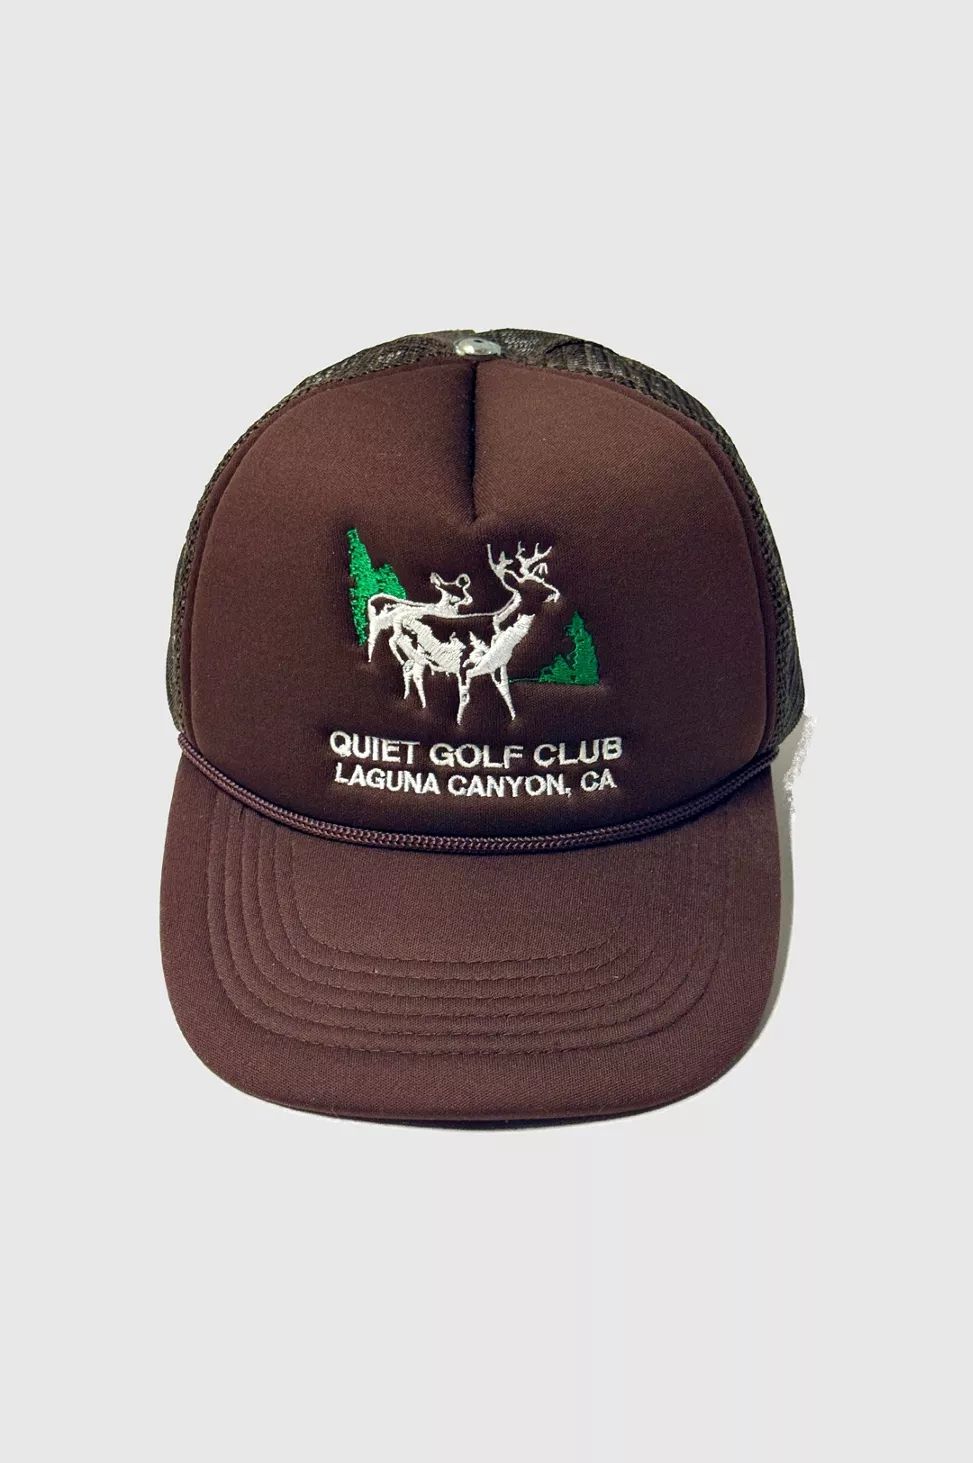 Vintage 1980’s Quiet Golfing Mesh Trucker Hat | Urban Outfitters (US and RoW)